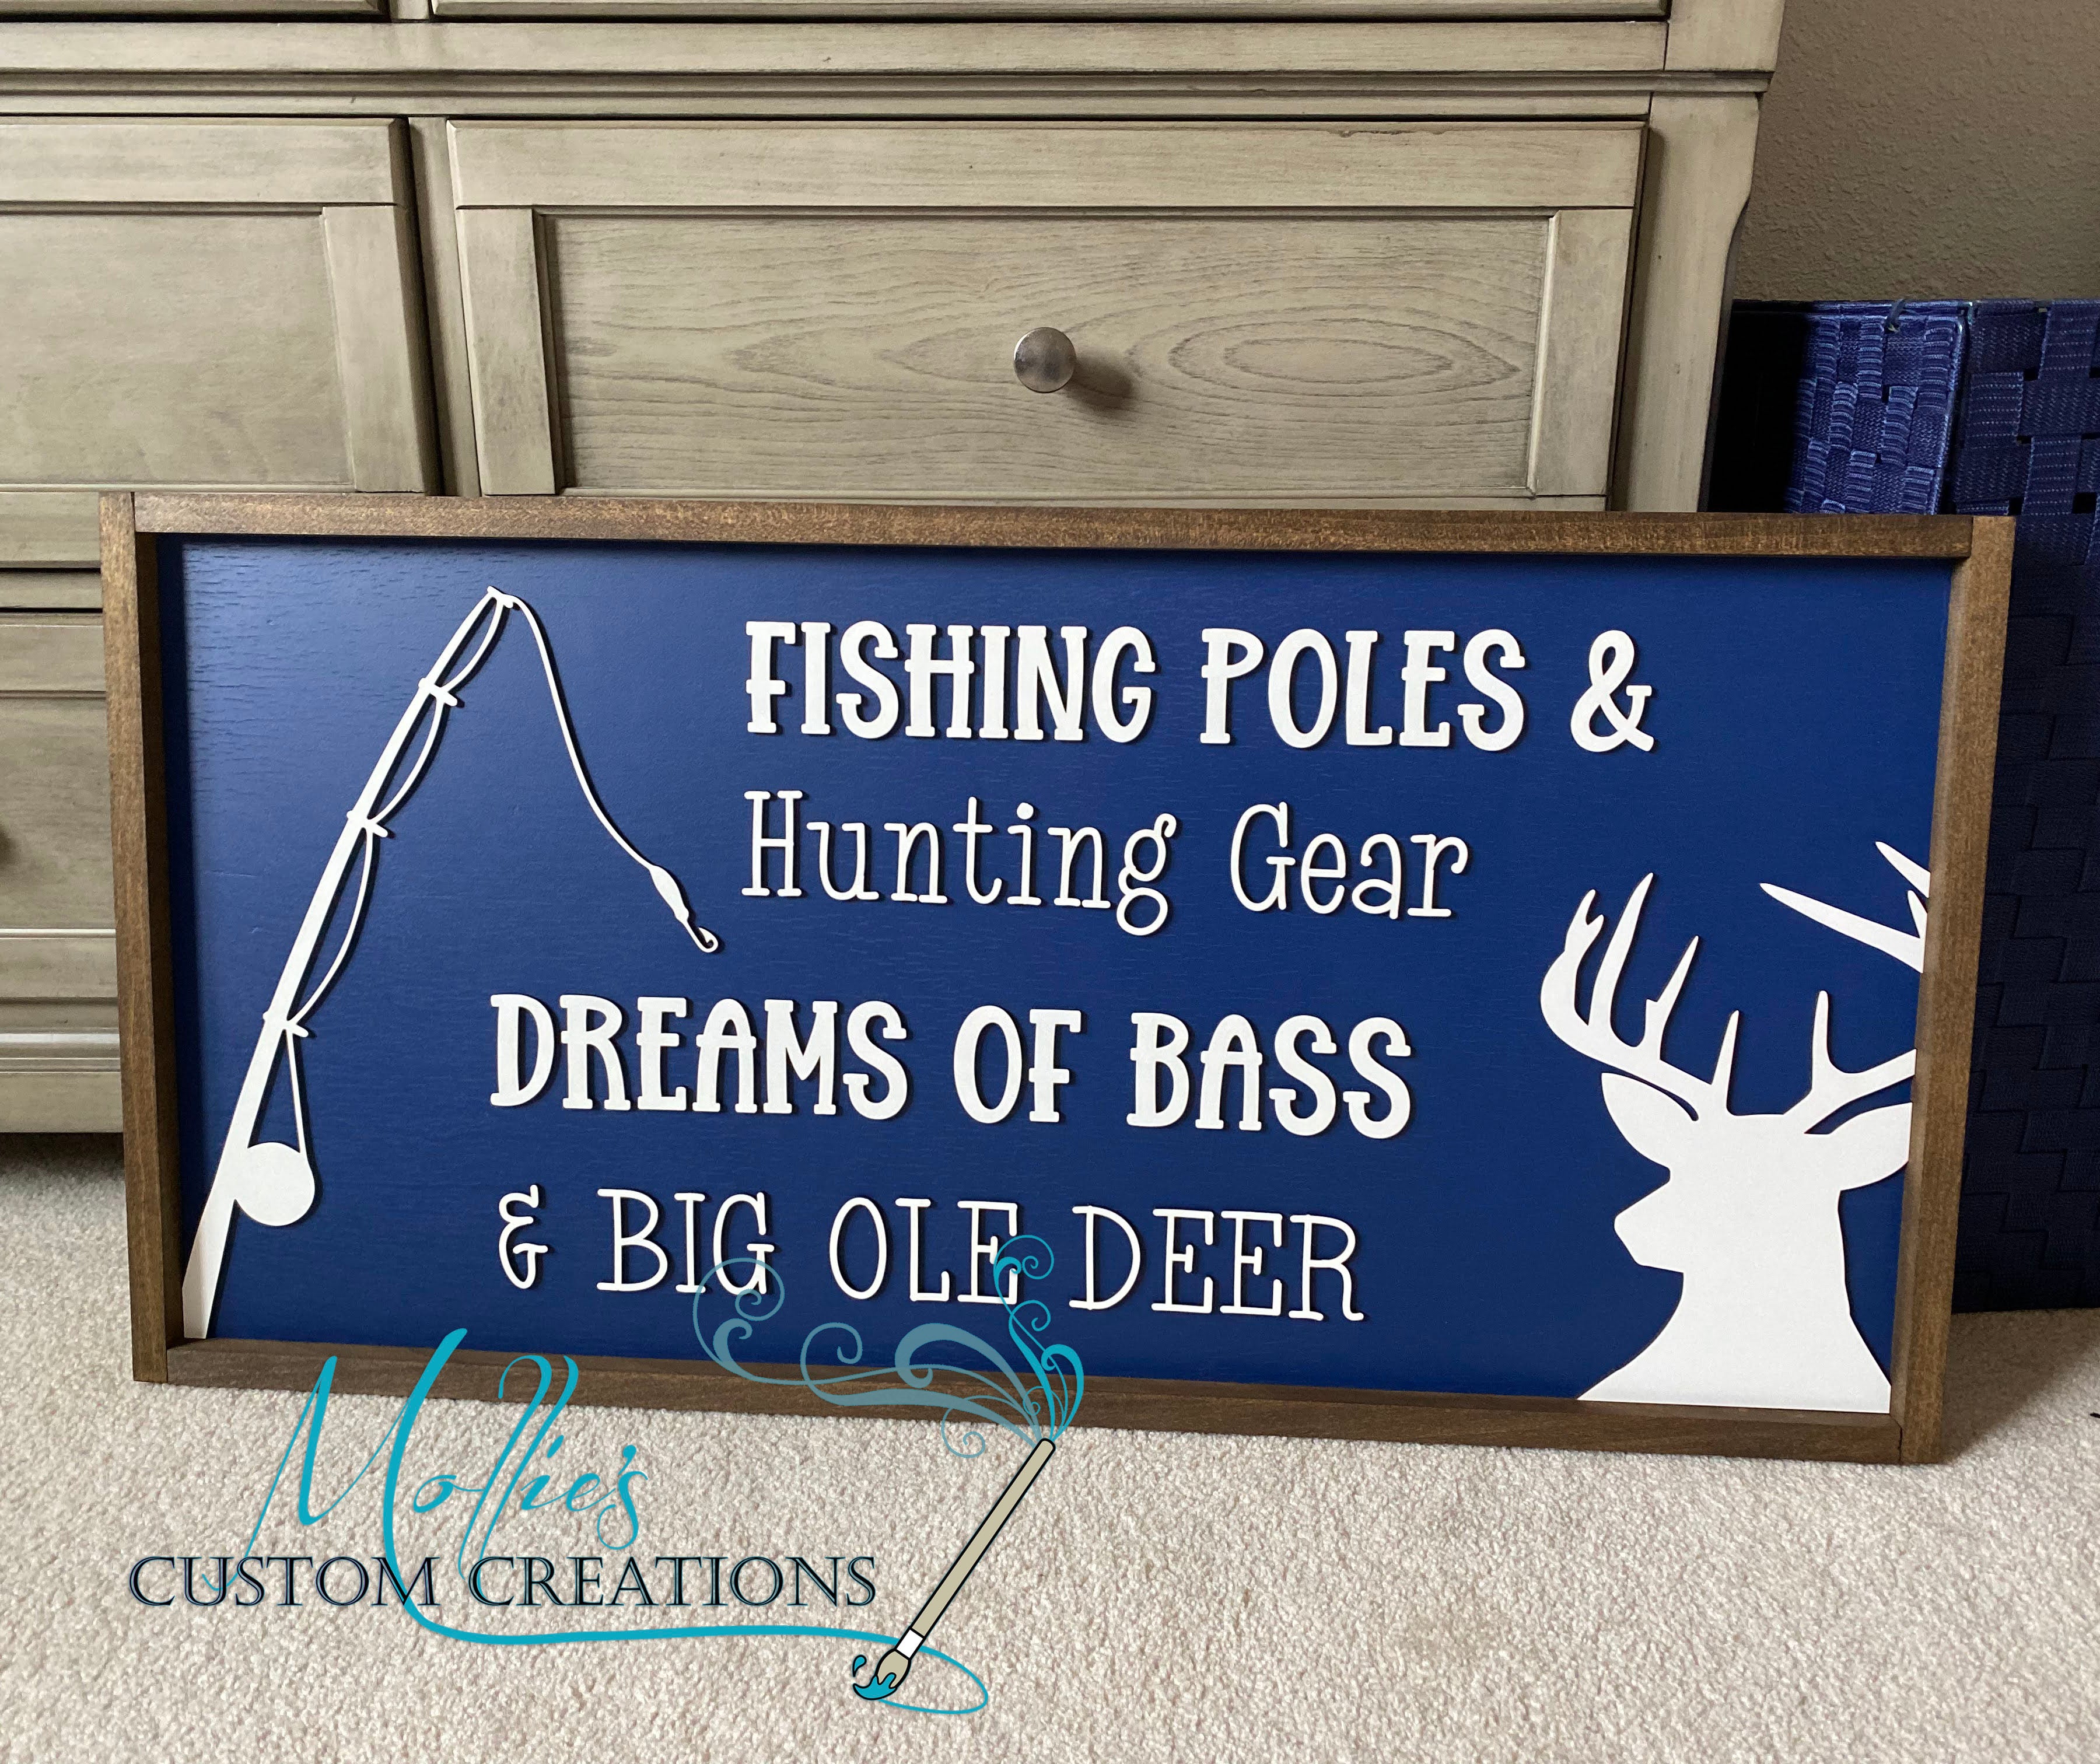 Fishing Poles and Hunting Gear Dreams of Bass and Big Ole Deer